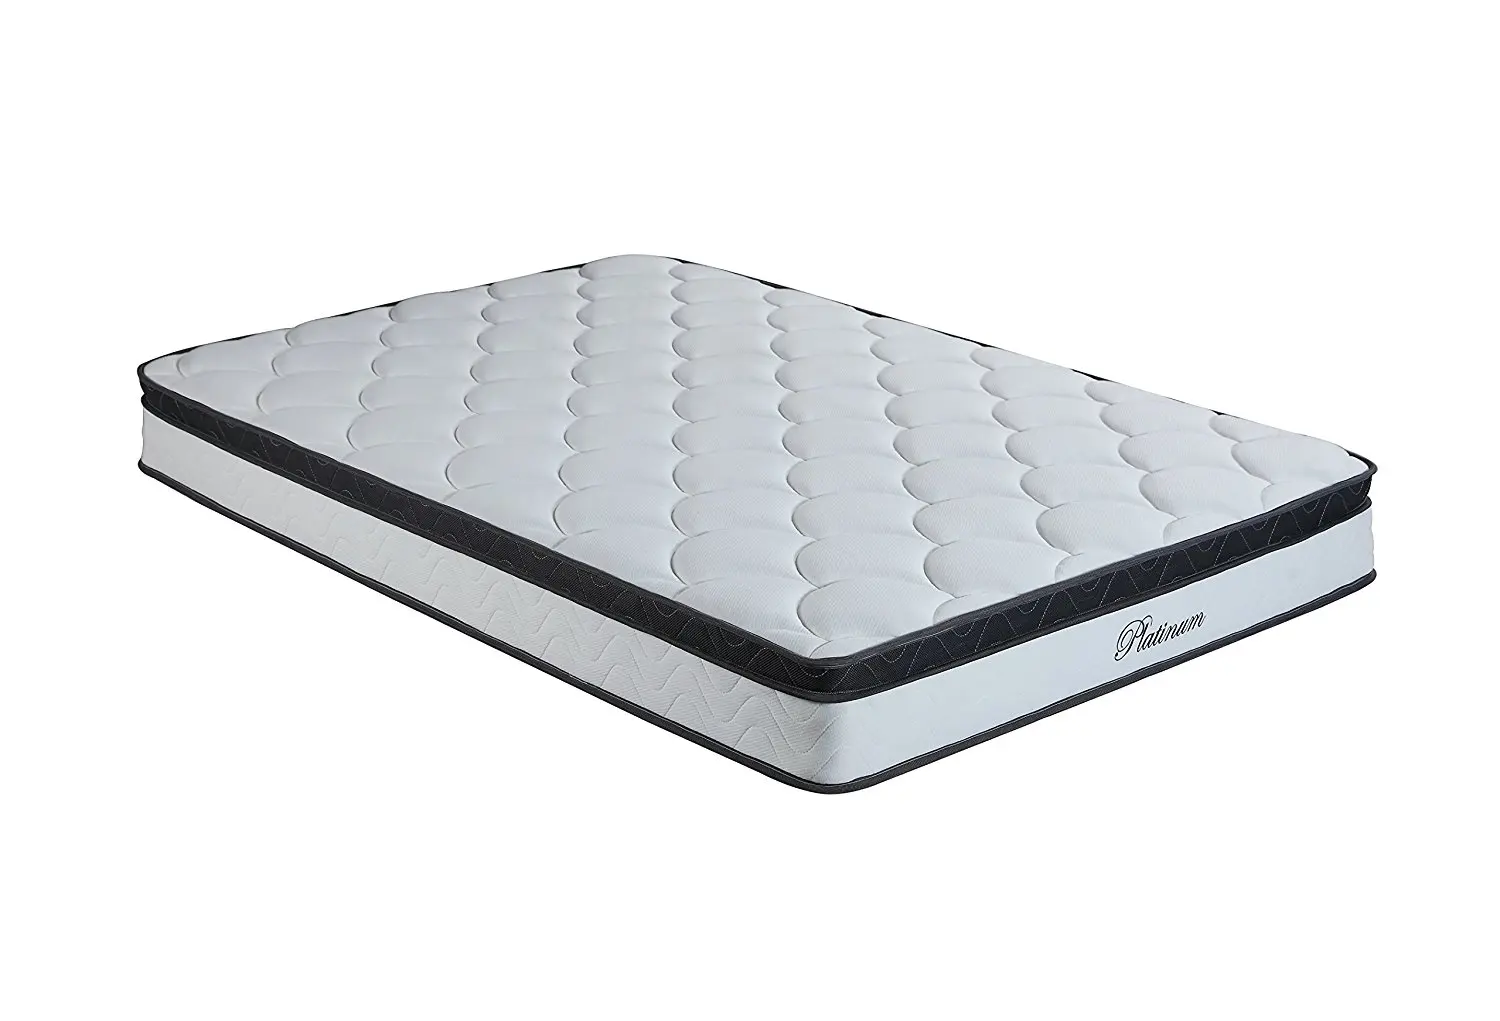 Incredible comfort and long lasting featuring a pillow top and soft removab...